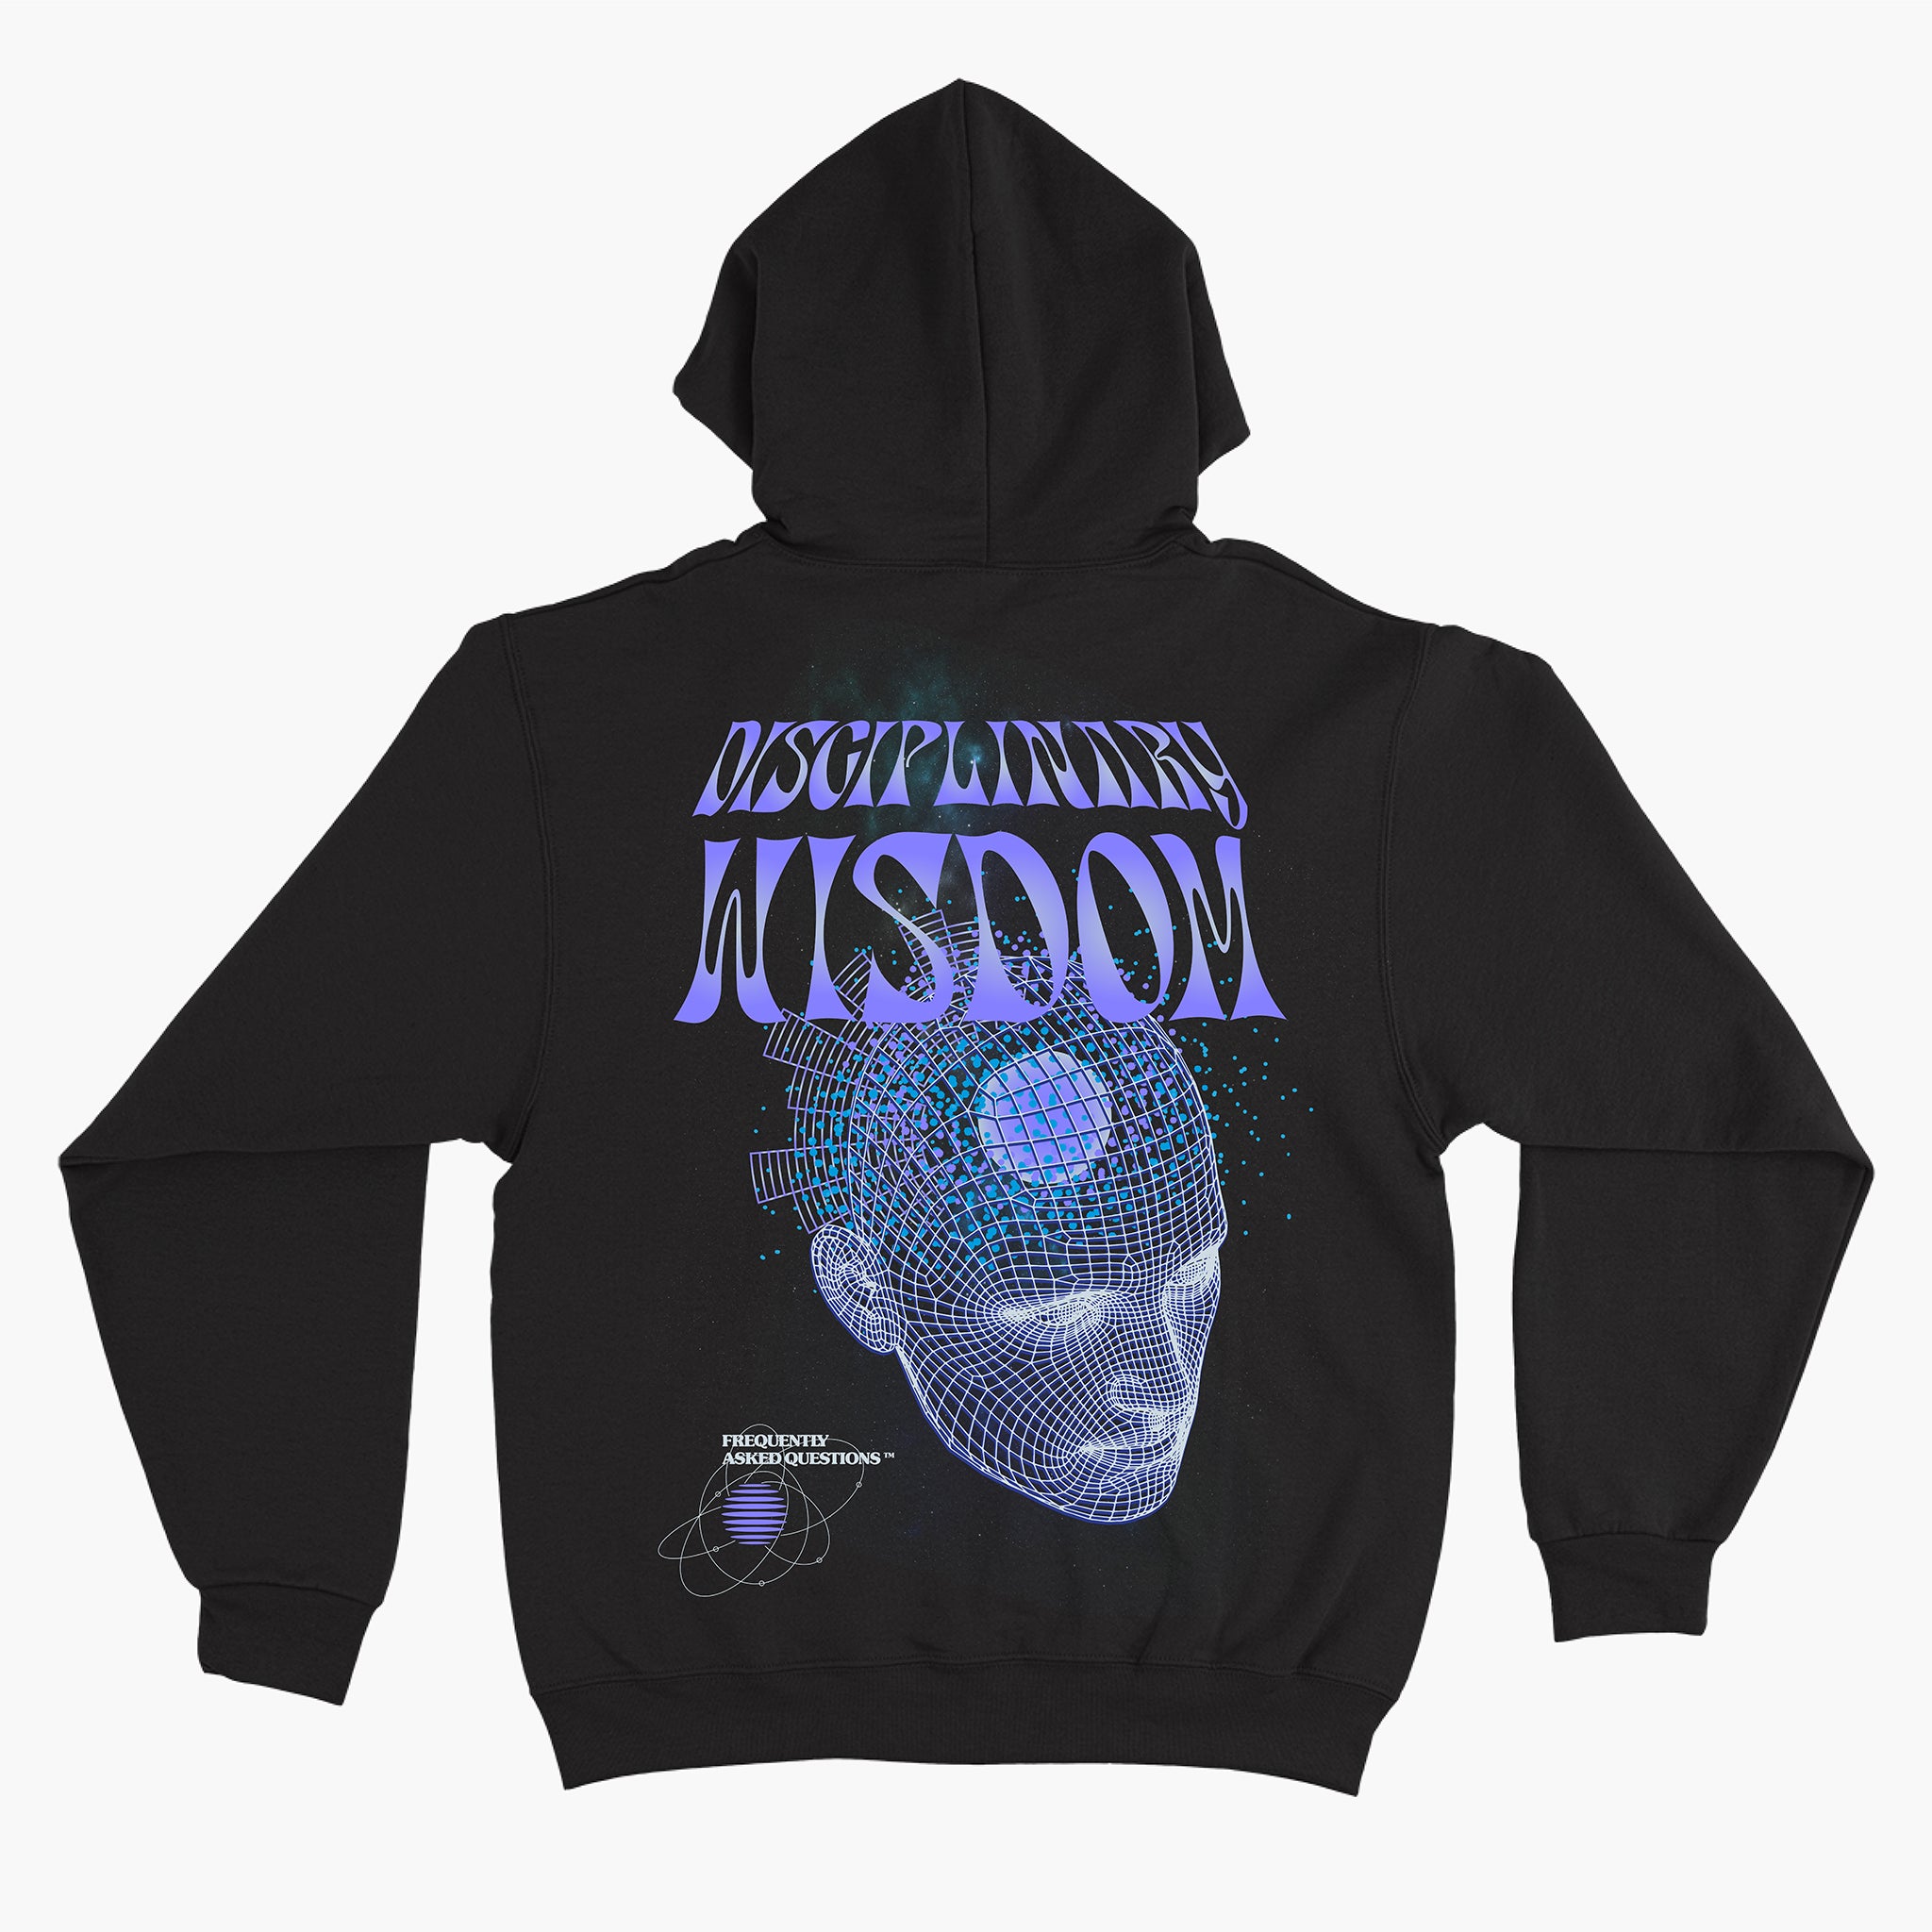 Wisdom Hoodie - Frequently Asked Questions